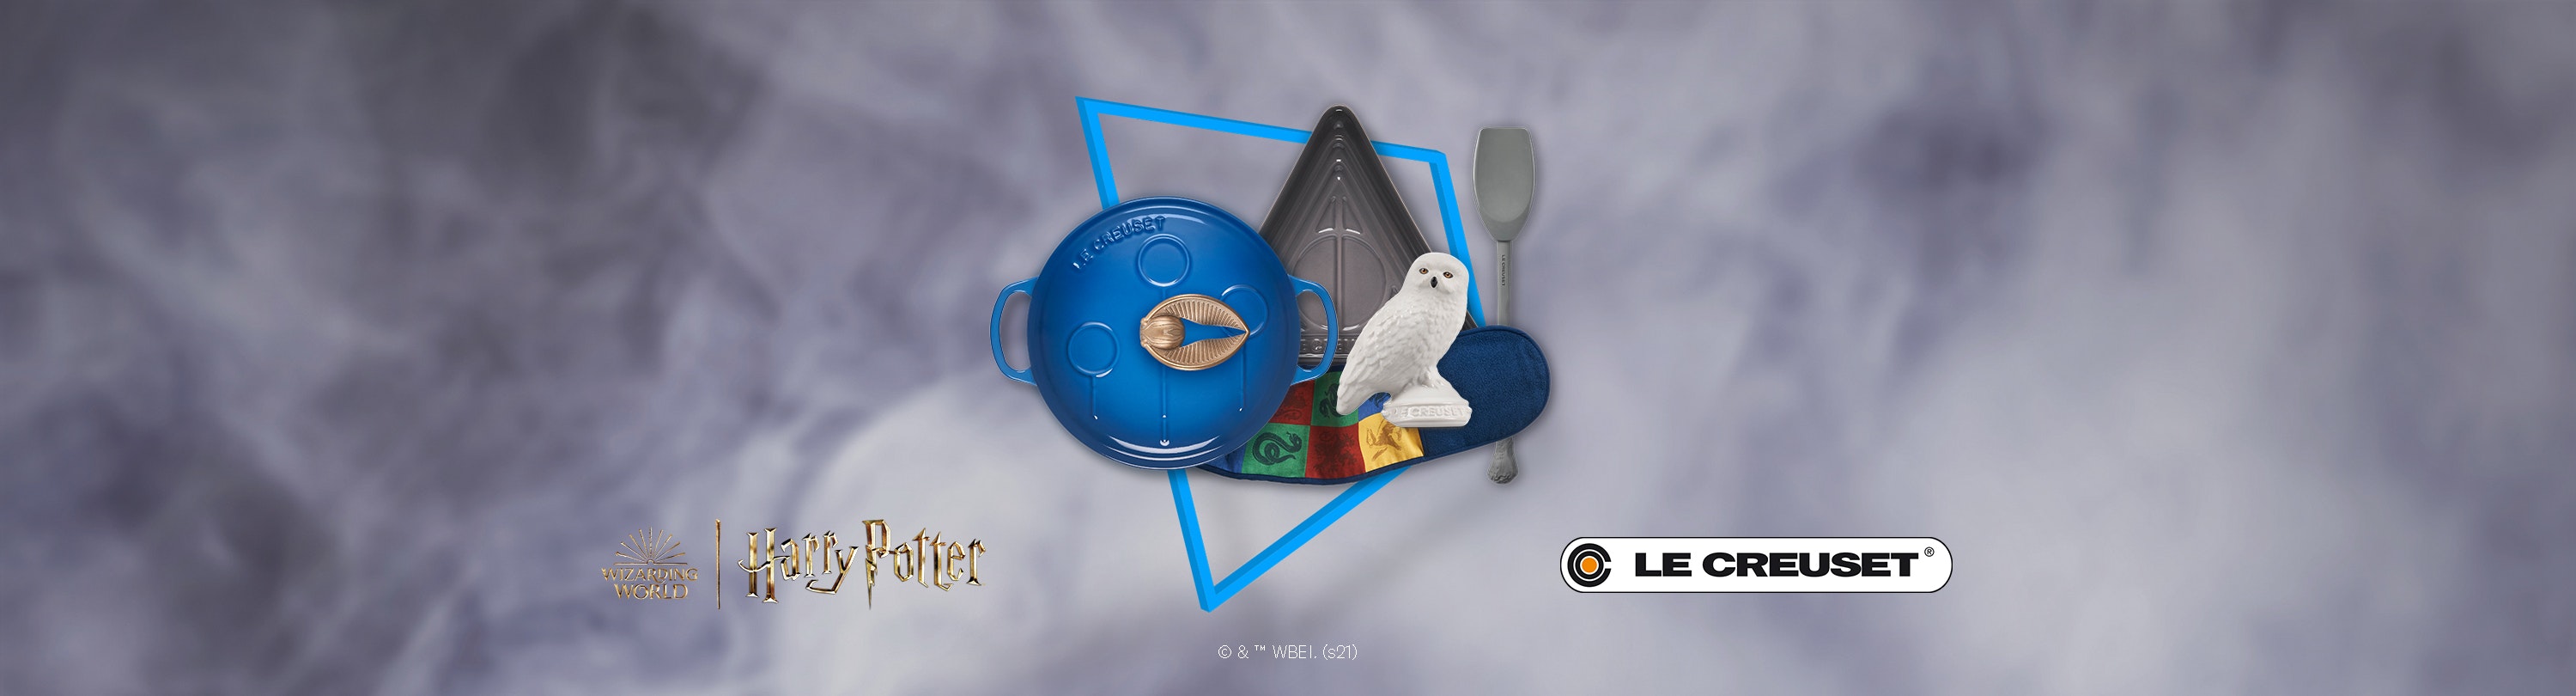 A collage of the Sorting Hat, Hedwig, a Le Creuset pot with the Golden Snitch on a smokey background